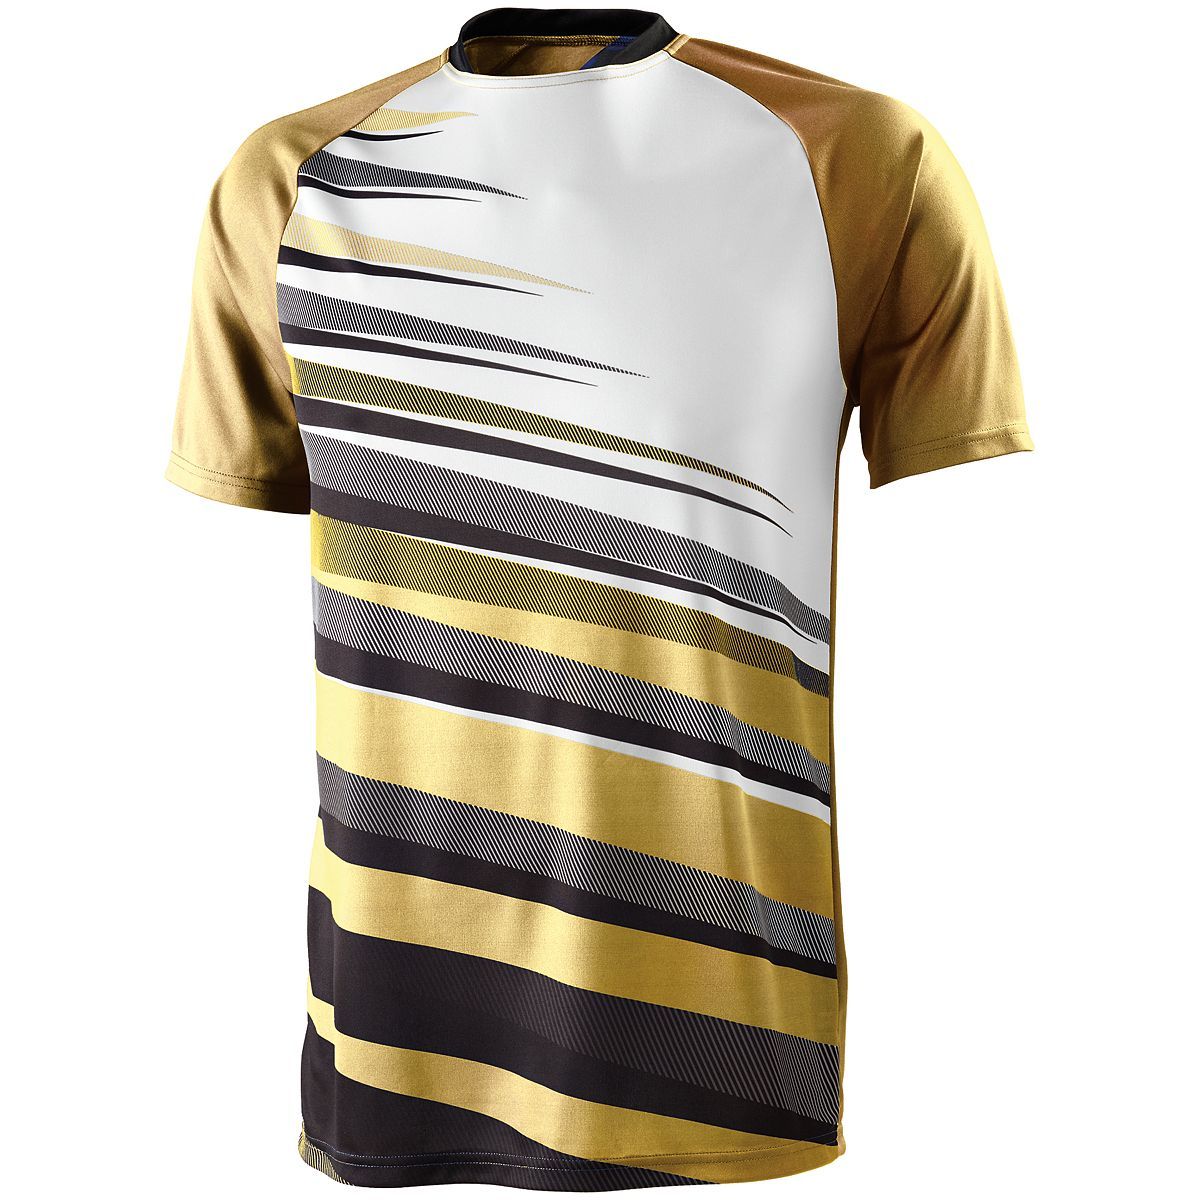 High 5 Youth Galactic Jersey in Vegas Gold/Black/White  -Part of the Youth, Youth-Jersey, High5-Products, Soccer, Shirts, All-Sports-1 product lines at KanaleyCreations.com